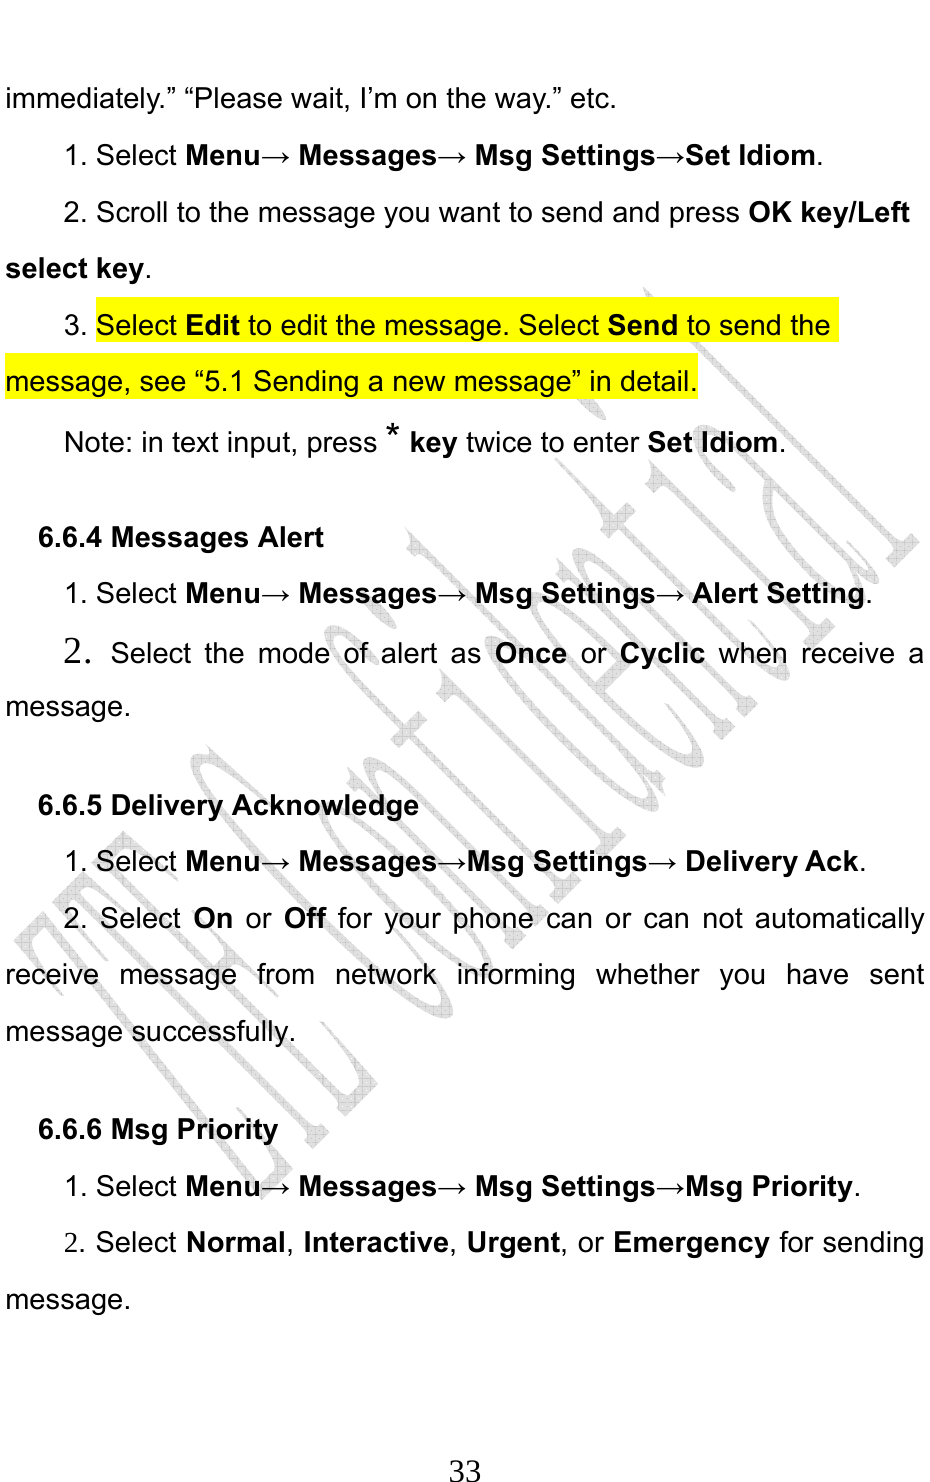                              33immediately.” “Please wait, I’m on the way.” etc. 1. Select Menu→ Messages→ Msg Settings→Set Idiom.  2. Scroll to the message you want to send and press OK key/Left select key. 3. Select Edit to edit the message. Select Send to send the message, see “5.1 Sending a new message” in detail. Note: in text input, press * key twice to enter Set Idiom. 6.6.4 Messages Alert 1. Select Menu→ Messages→ Msg Settings→ Alert Setting. 2.  Select the mode of alert as Once or Cyclic when receive a message.  6.6.5 Delivery Acknowledge 1. Select Menu→ Messages→Msg Settings→ Delivery Ack. 2. Select On or Off for your phone can or can not automatically receive message from network informing whether you have sent message successfully. 6.6.6 Msg Priority   1. Select Menu→ Messages→ Msg Settings→Msg Priority. 2. Select Normal, Interactive, Urgent, or Emergency for sending message. 